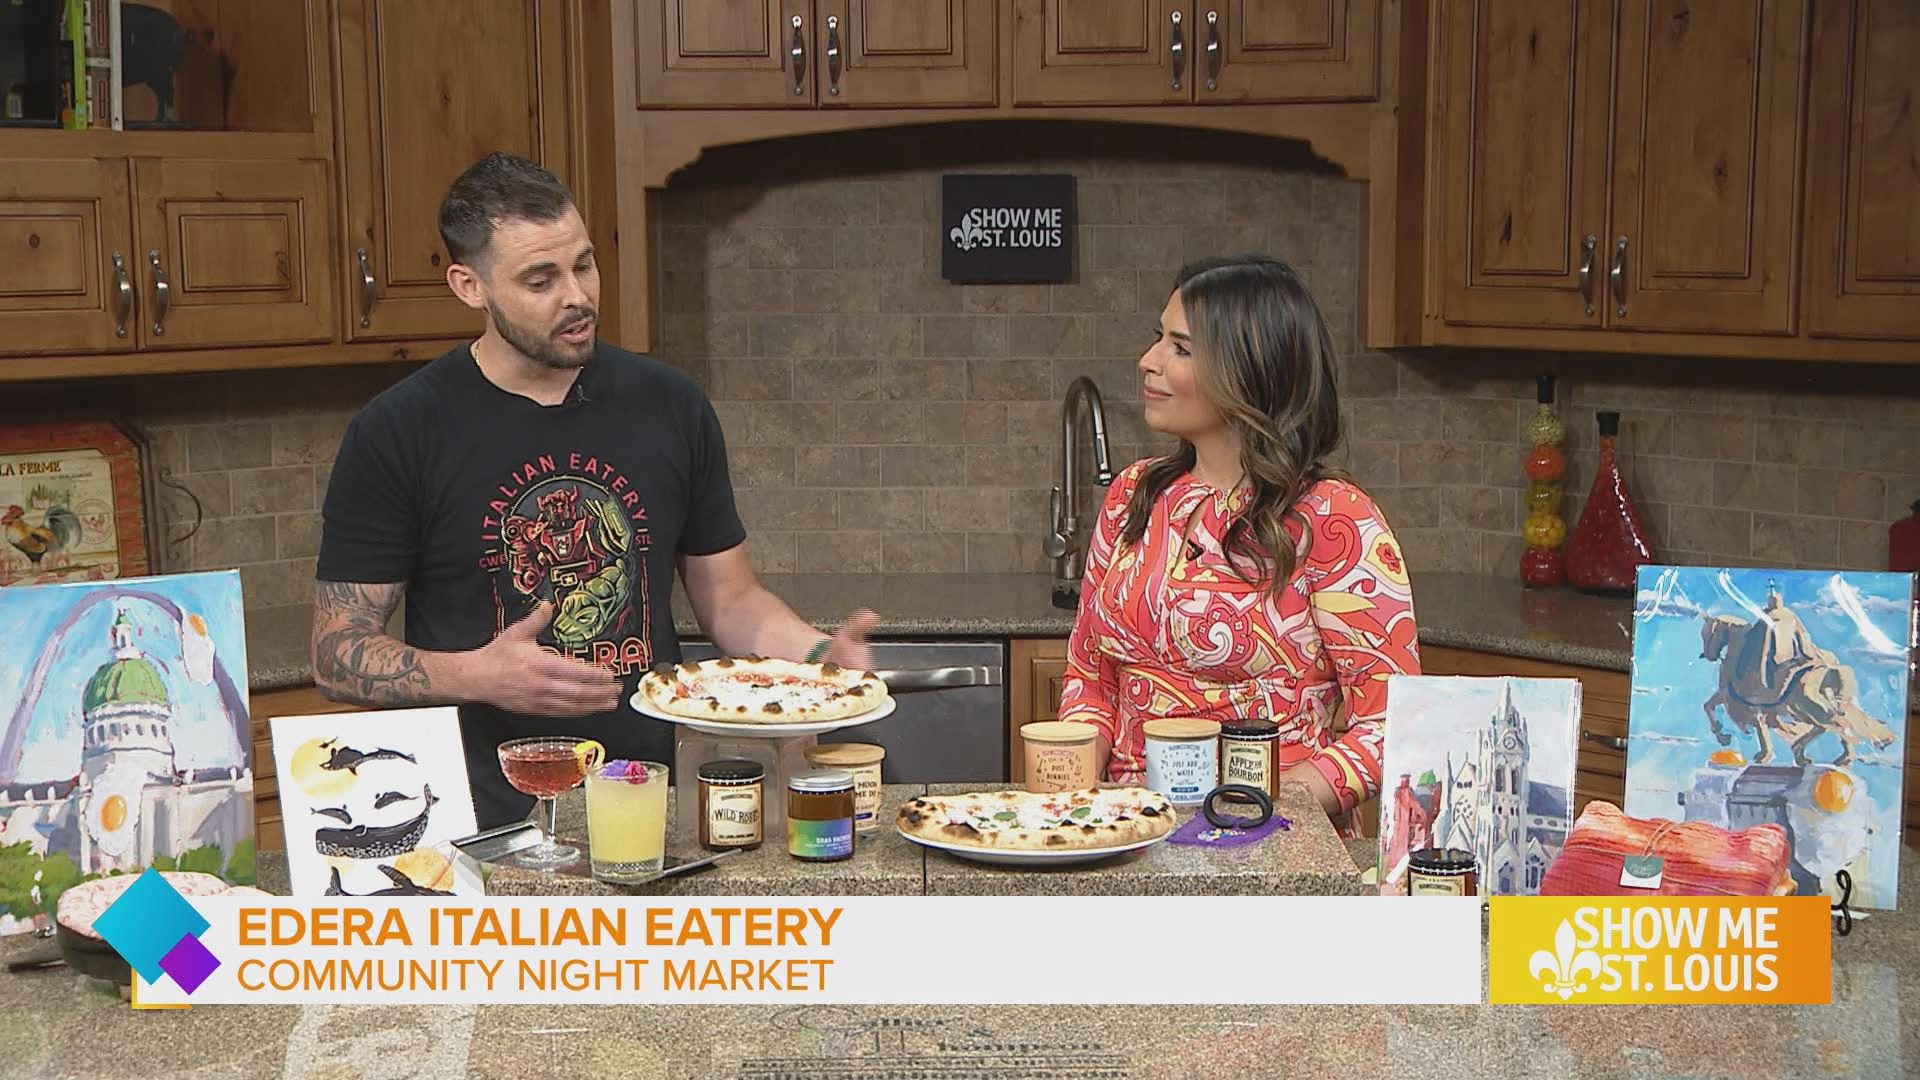 Executive Chef,  Andrew Simon stopped by the Show Me St. Louis kitchen to tell us a bit about the event.